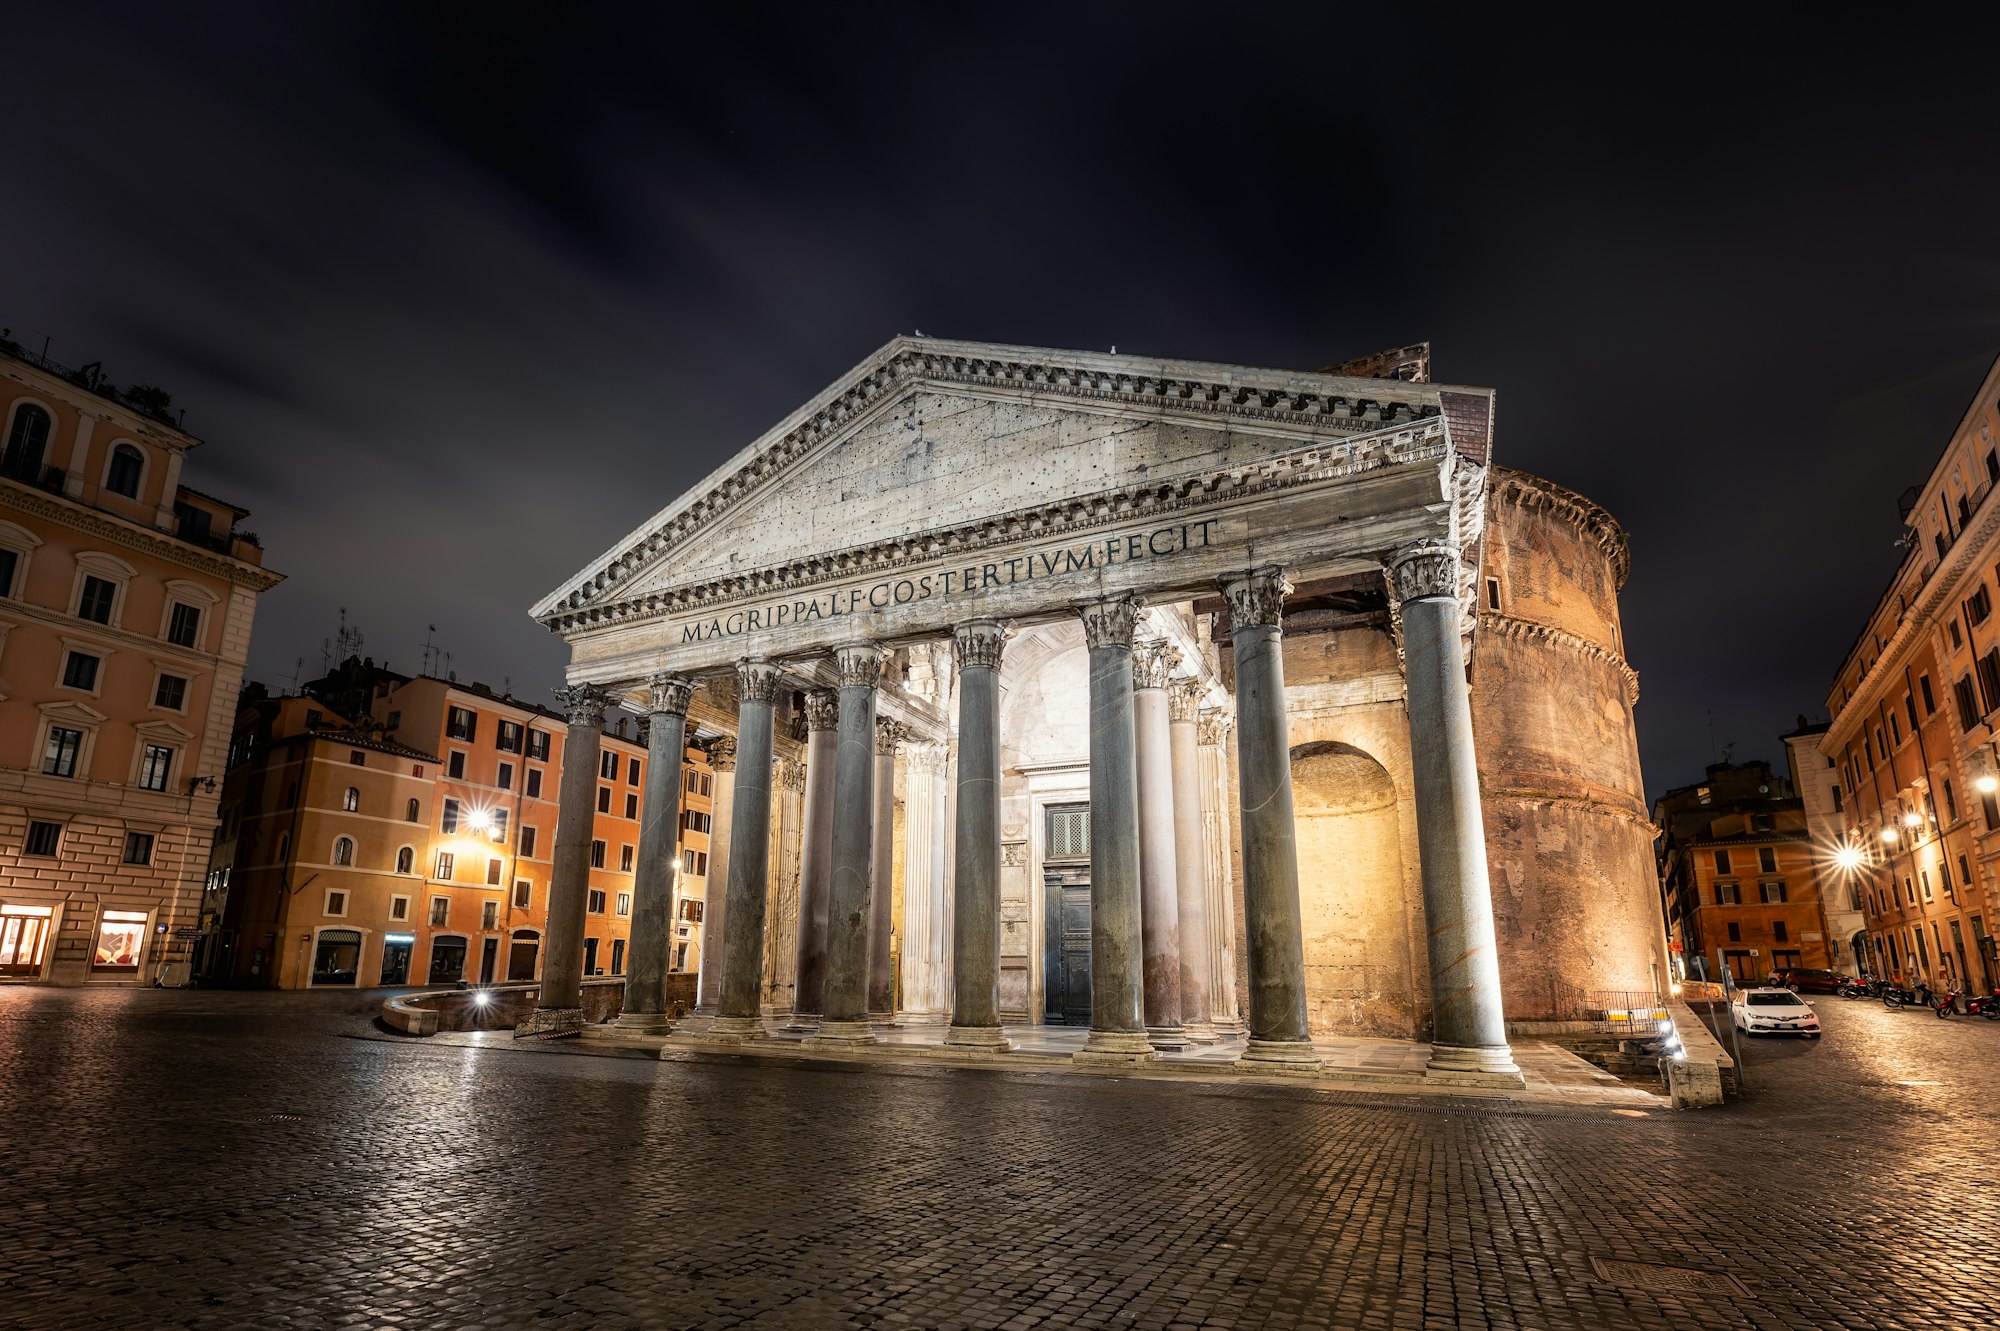 Night view of the Pantheon building in Rome